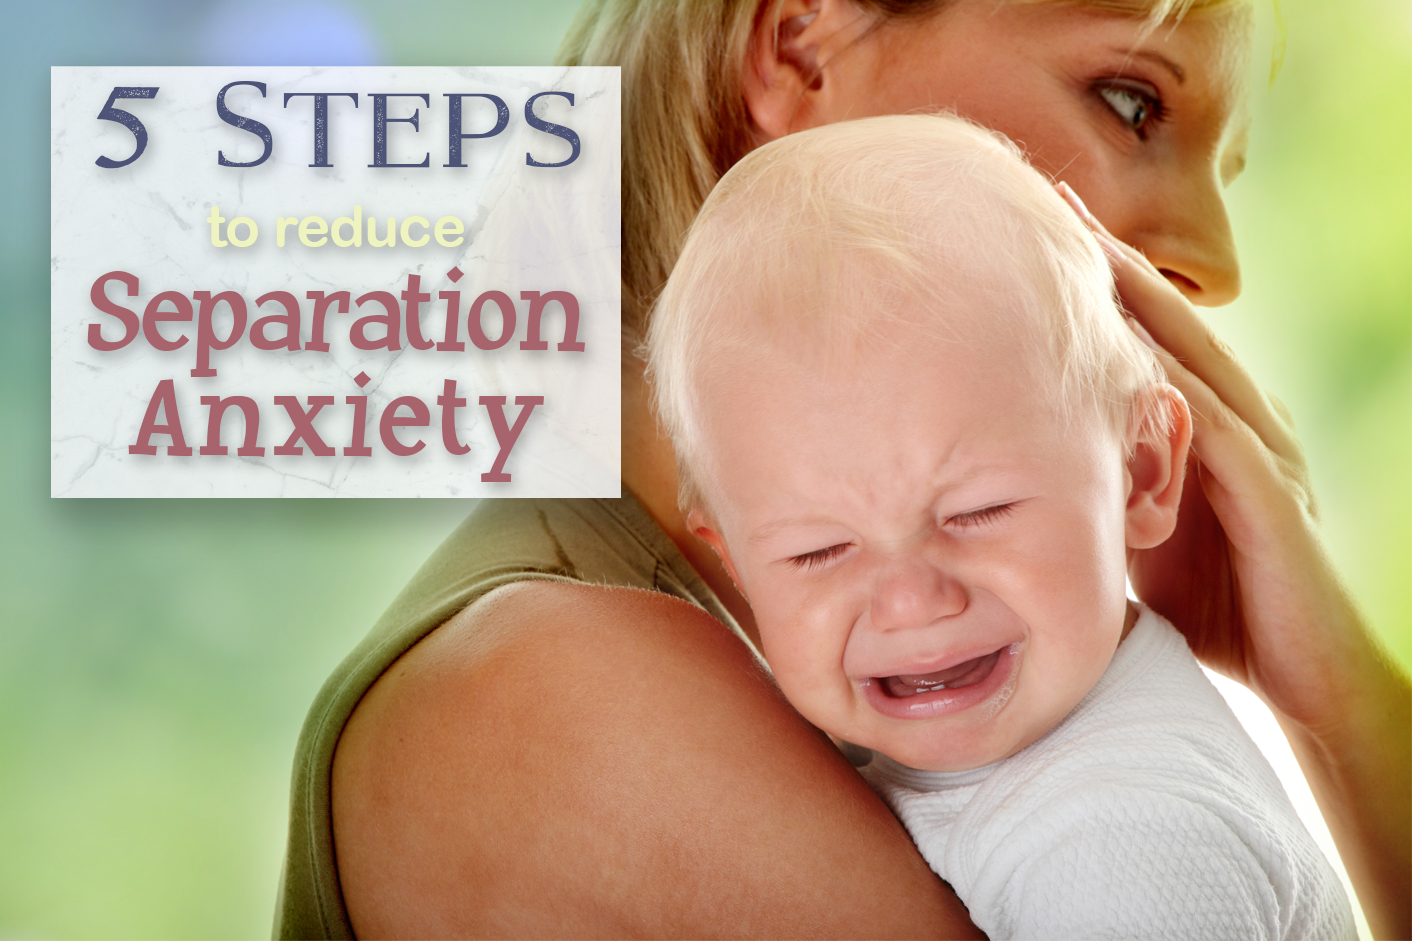 5 Steps to Reduce Separation Anxiety in Children